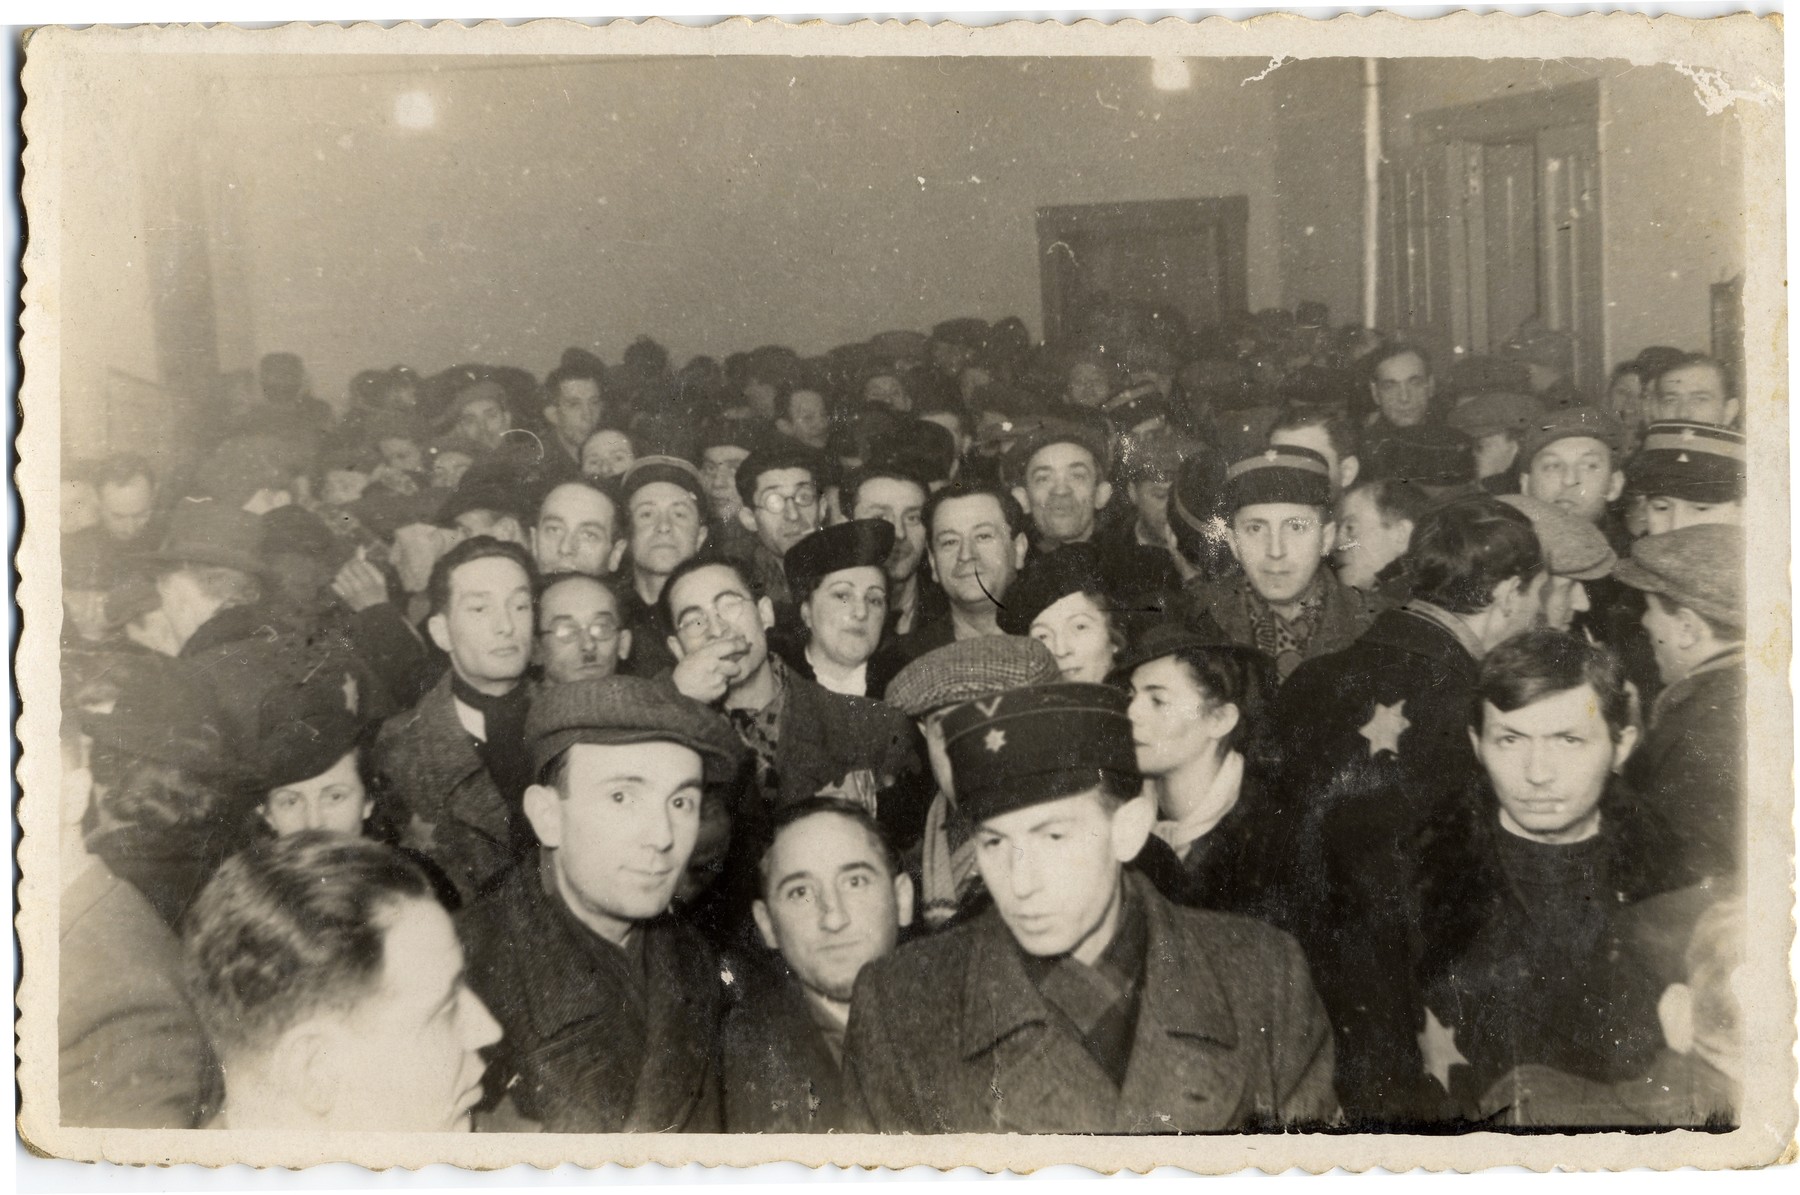 Jewish men and women wearing Stars of David, including several policeman, crowd together in a hall in the Lodz ghetto.